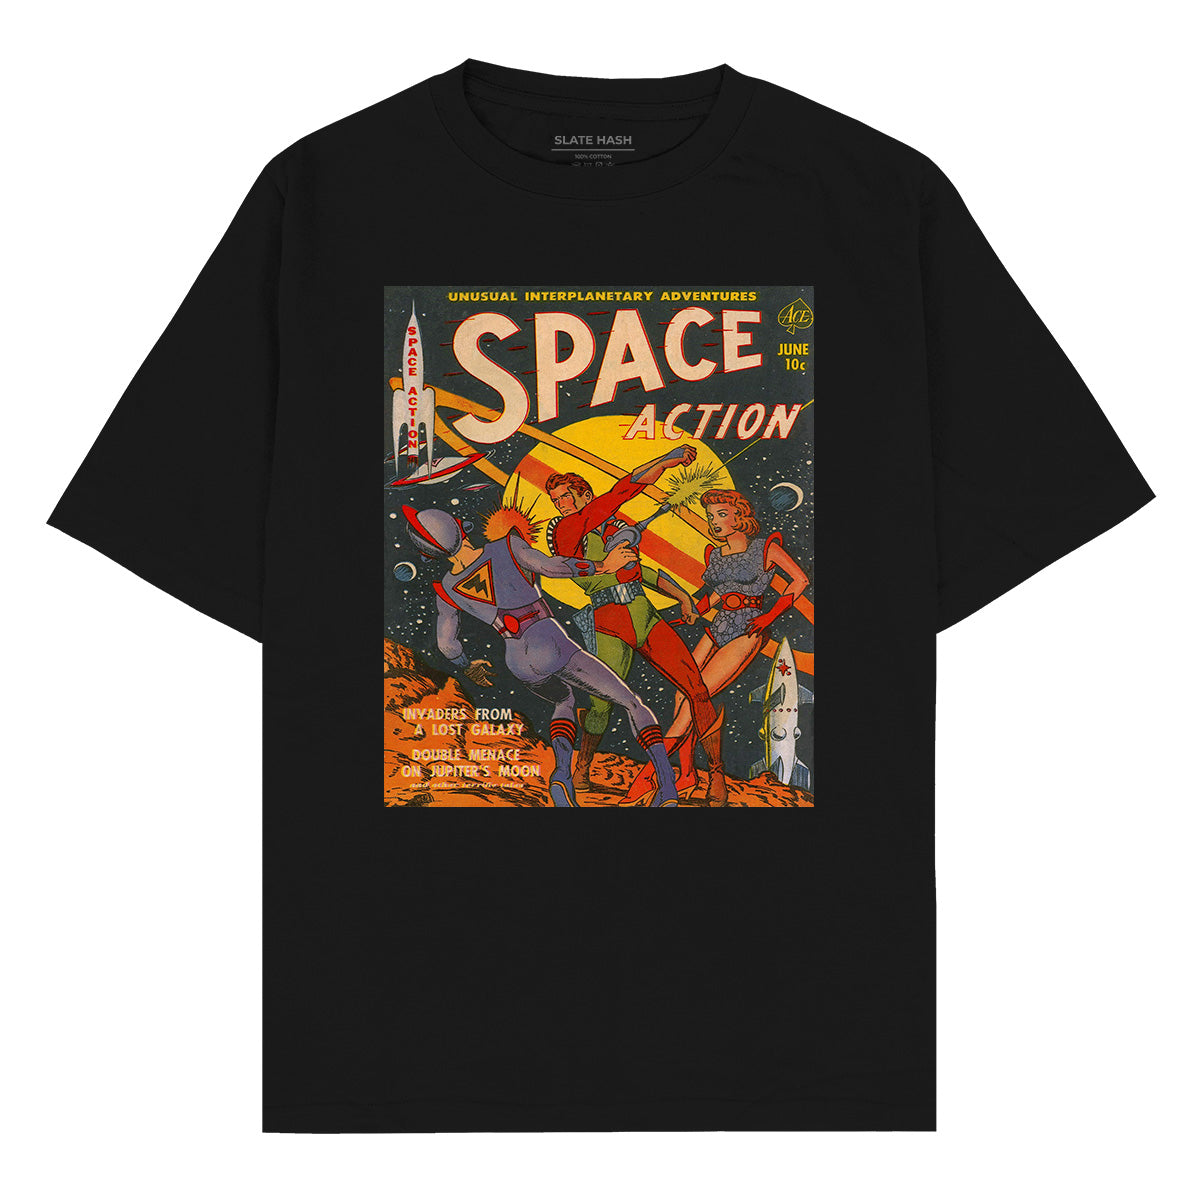 Space Action Oversized T-shirt – SLATE HASH